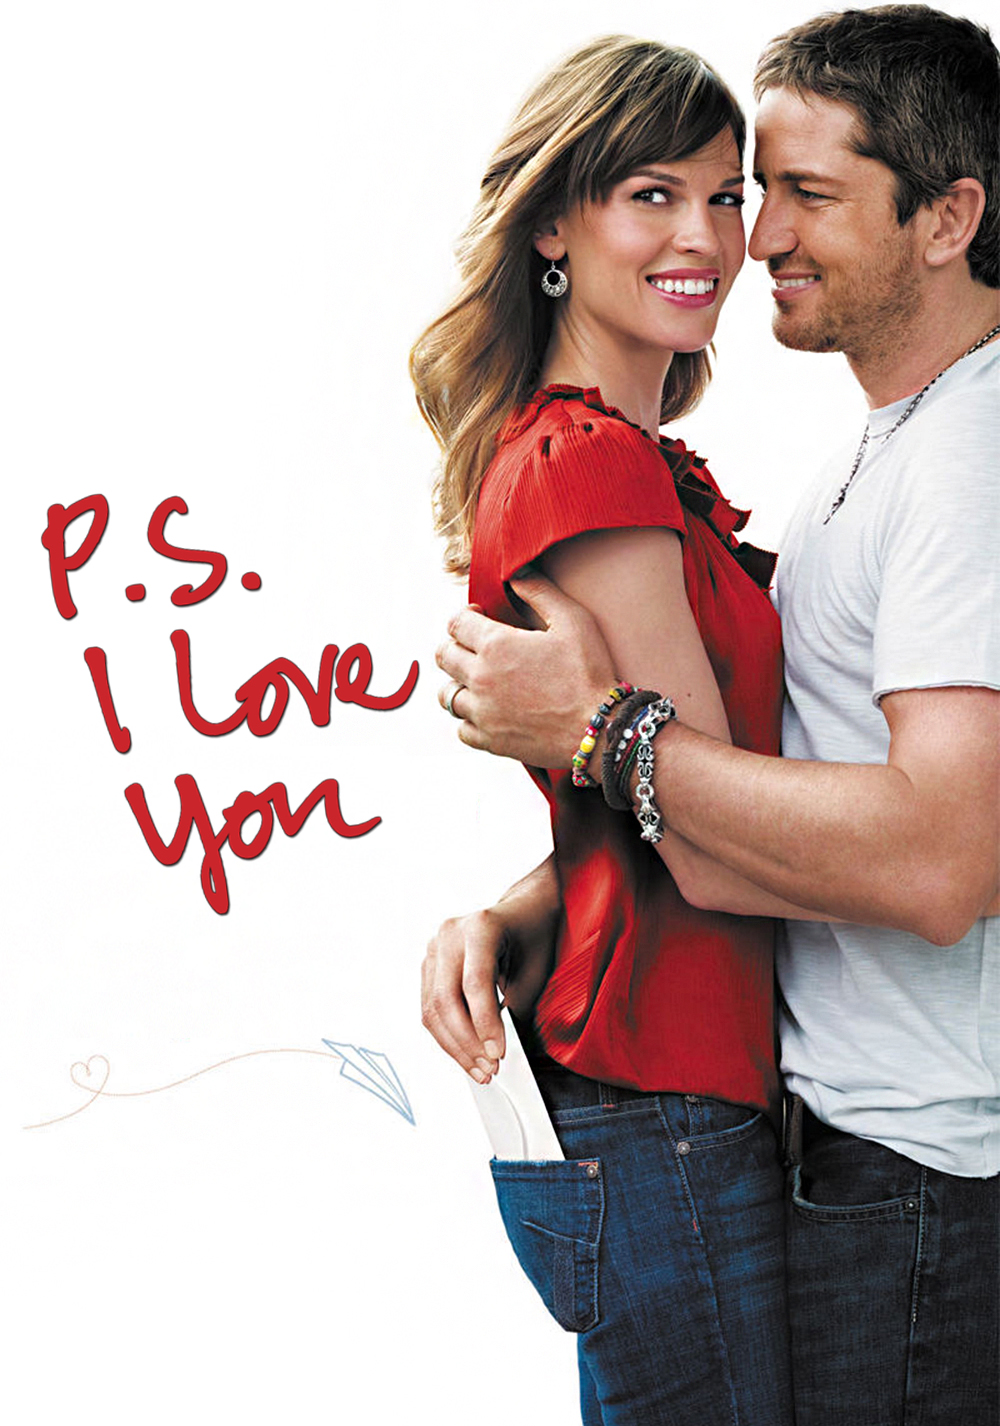 P.S. I Love You Picture Image Abyss